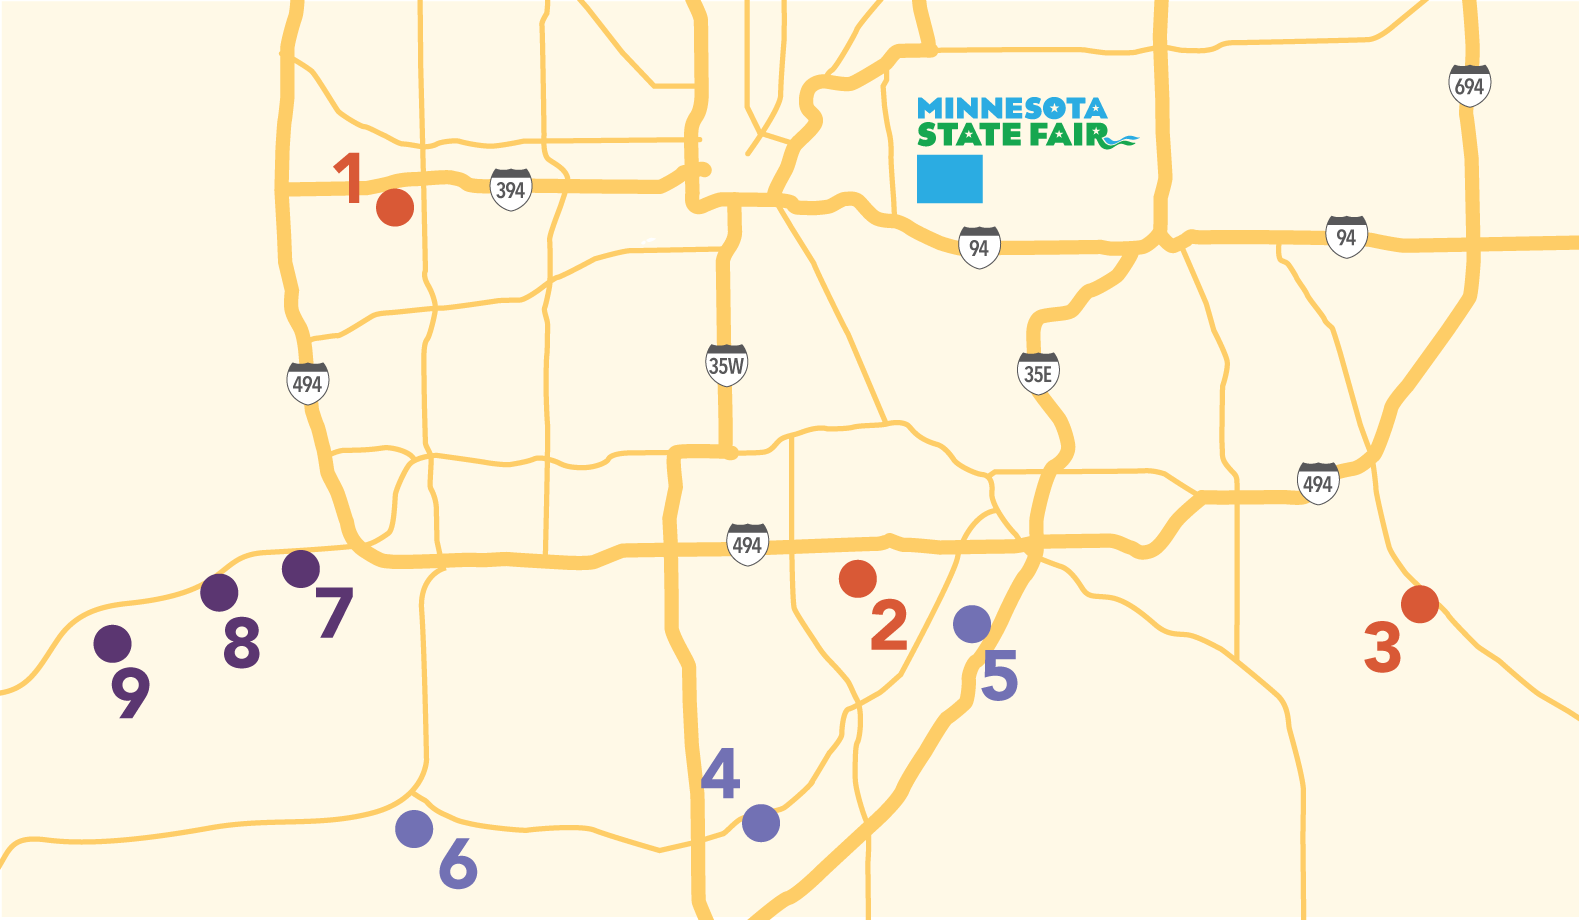 Map of park and ride express service locations for the State Fair